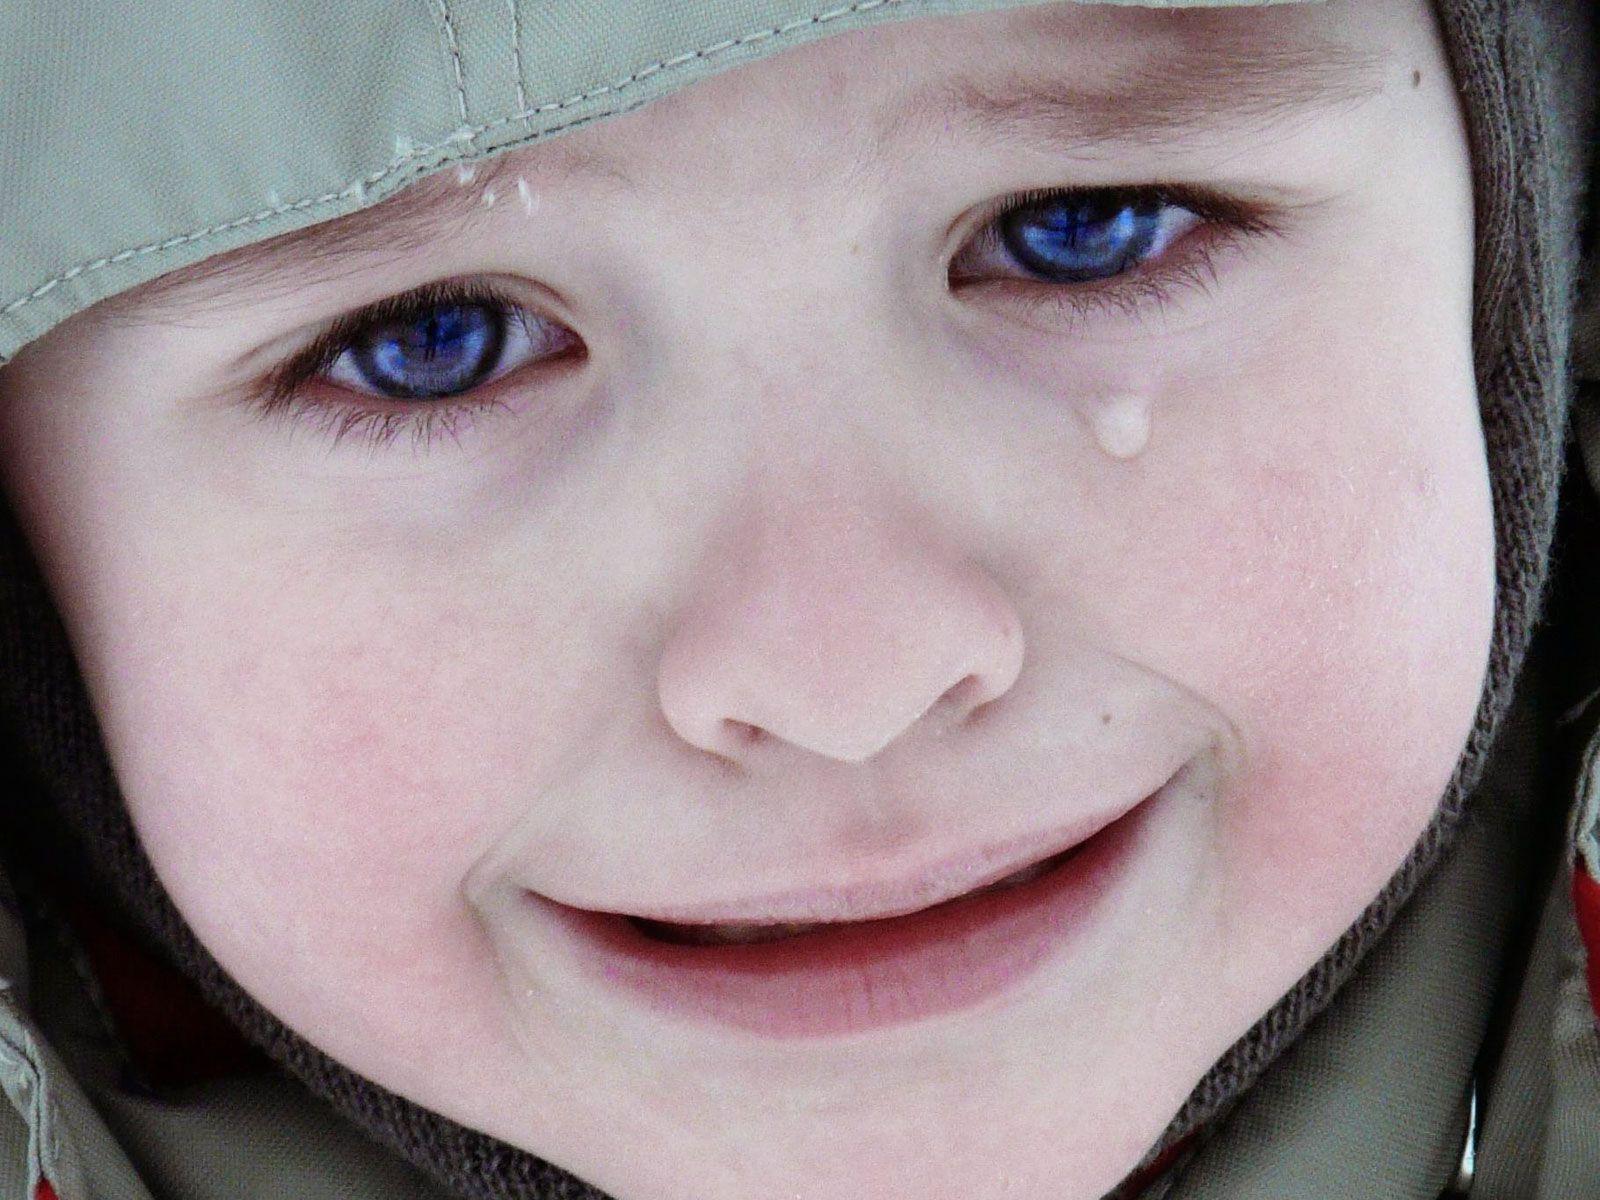 Wallpaper OF Sad And Crying Babies In HD